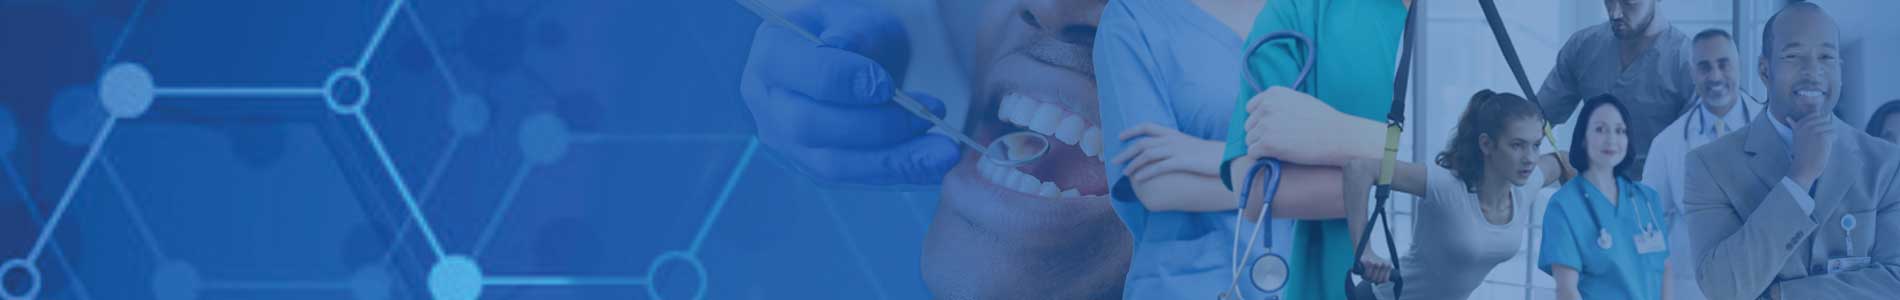 Dental Hygiene Faculty Research and Directory banner image